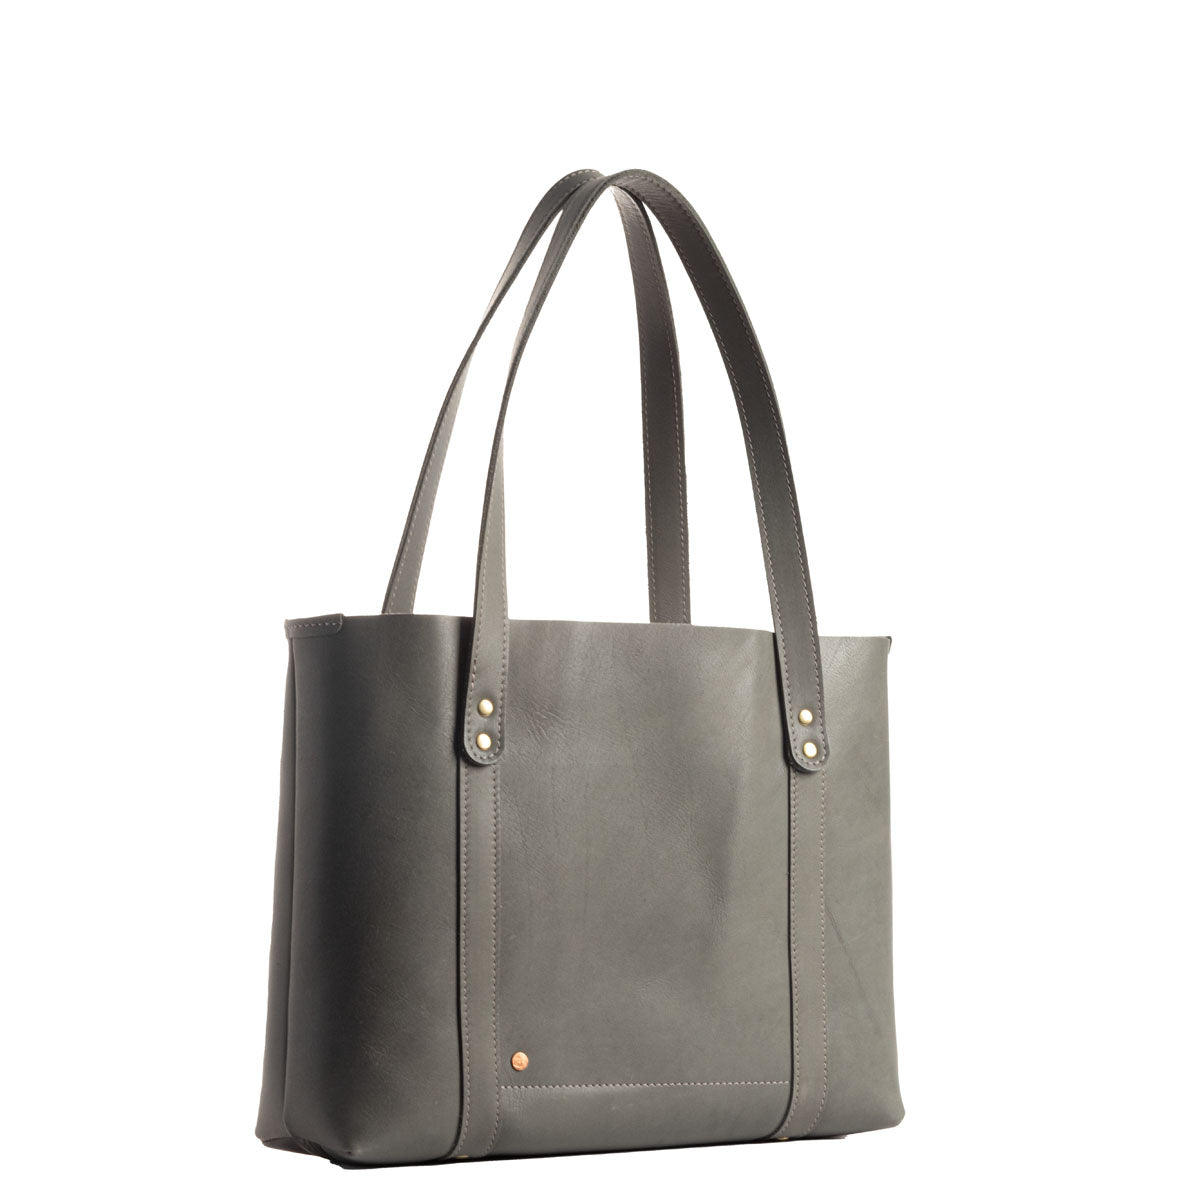 Leather Totes and Purses for Women Made in Ithaca NY by Under The Tree